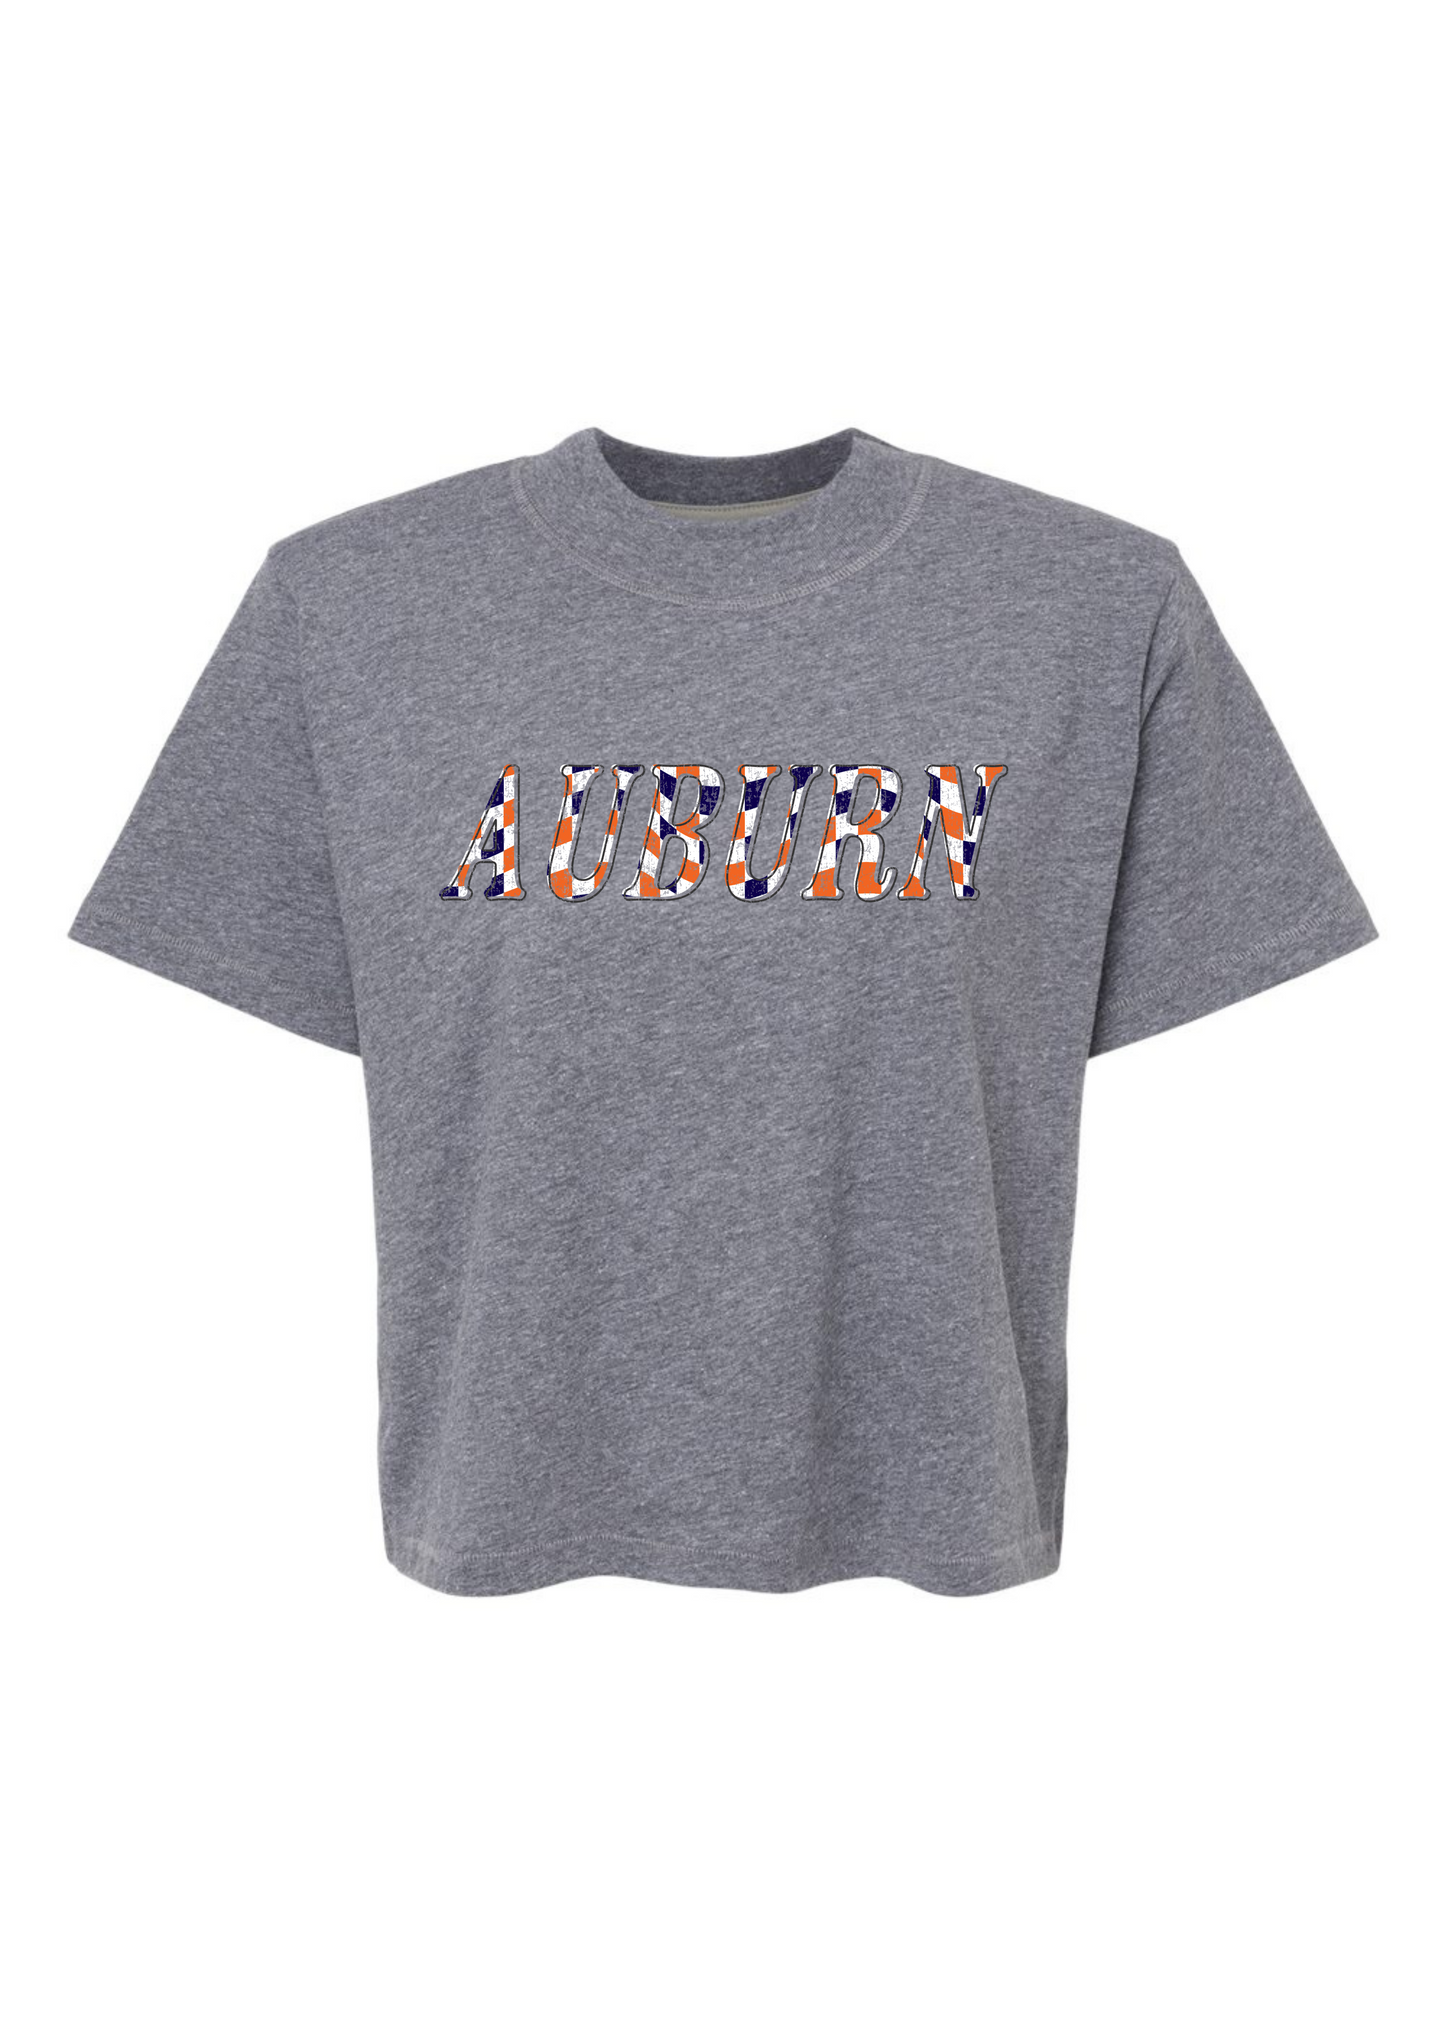 Auburn Checkered | Mom Crop Tee-Adult Tee-Sister Shirts-Sister Shirts, Cute & Custom Tees for Mama & Littles in Trussville, Alabama.